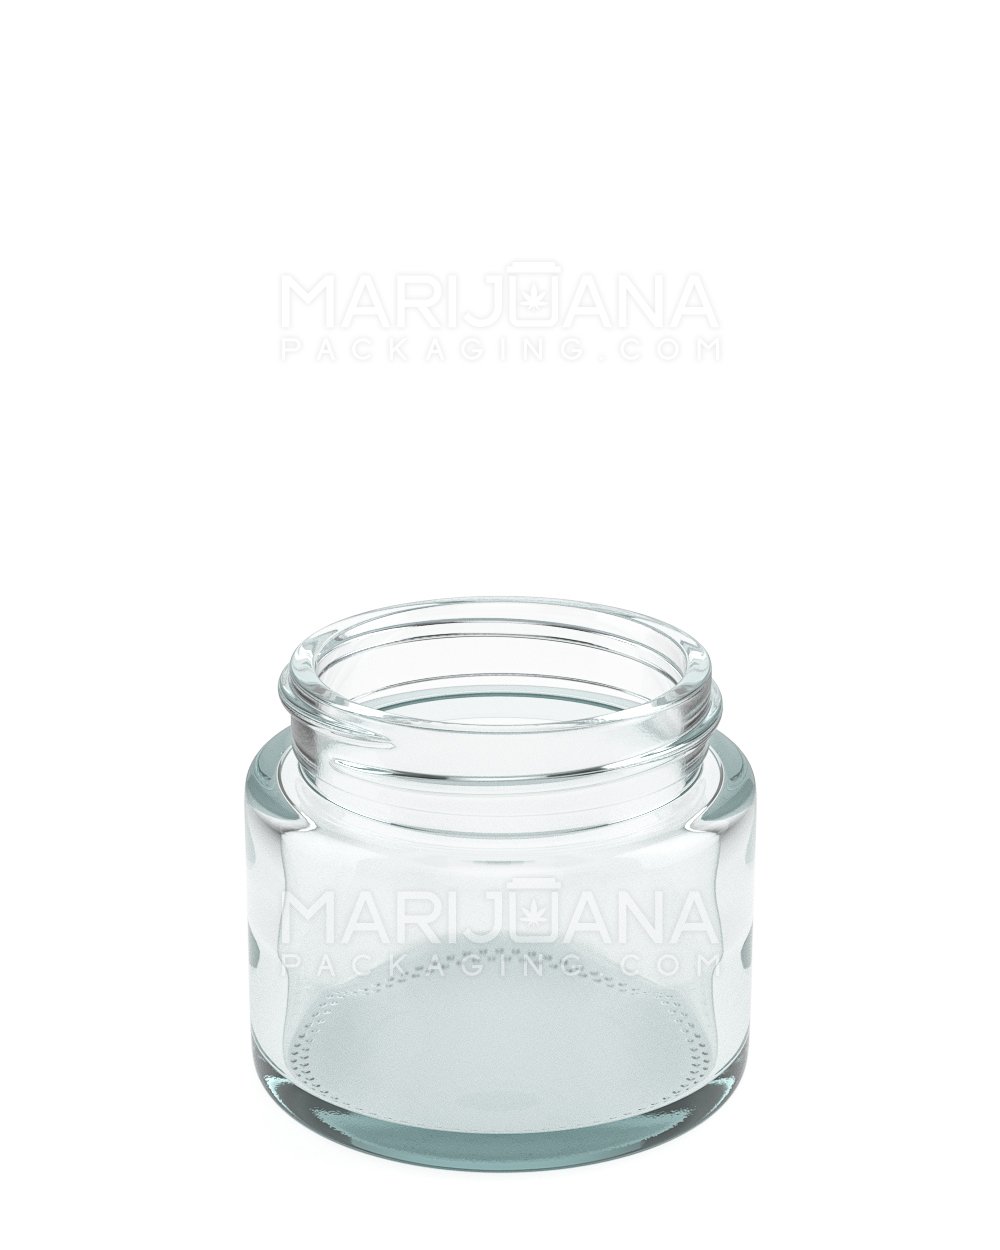 Straight Sided Clear Glass Jars | 53mm - 2.5oz - 32 Count - 2